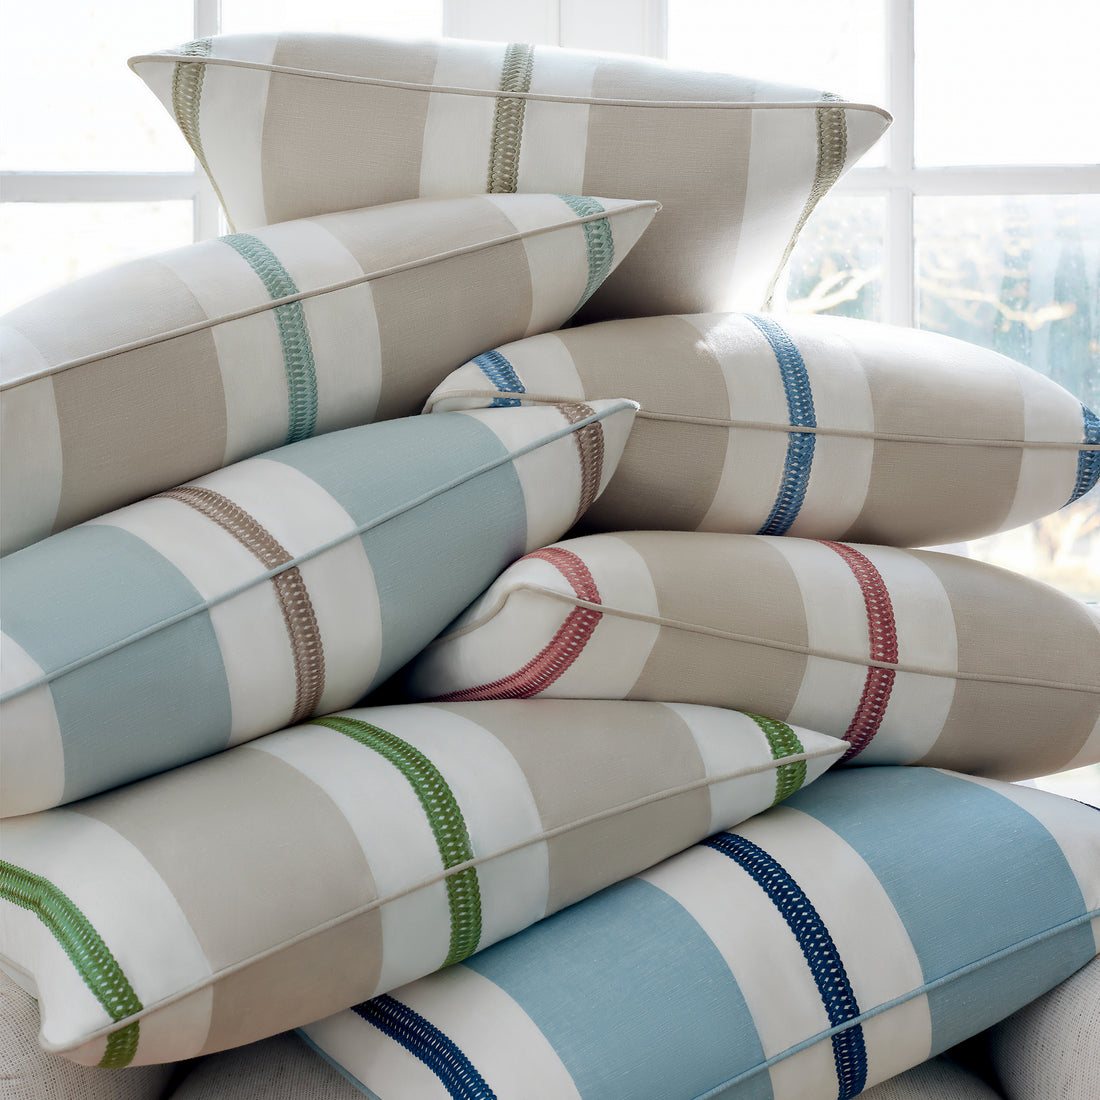 Pillows in Alden Stripe Embroidery fabric by Anna French in the Devon collection 